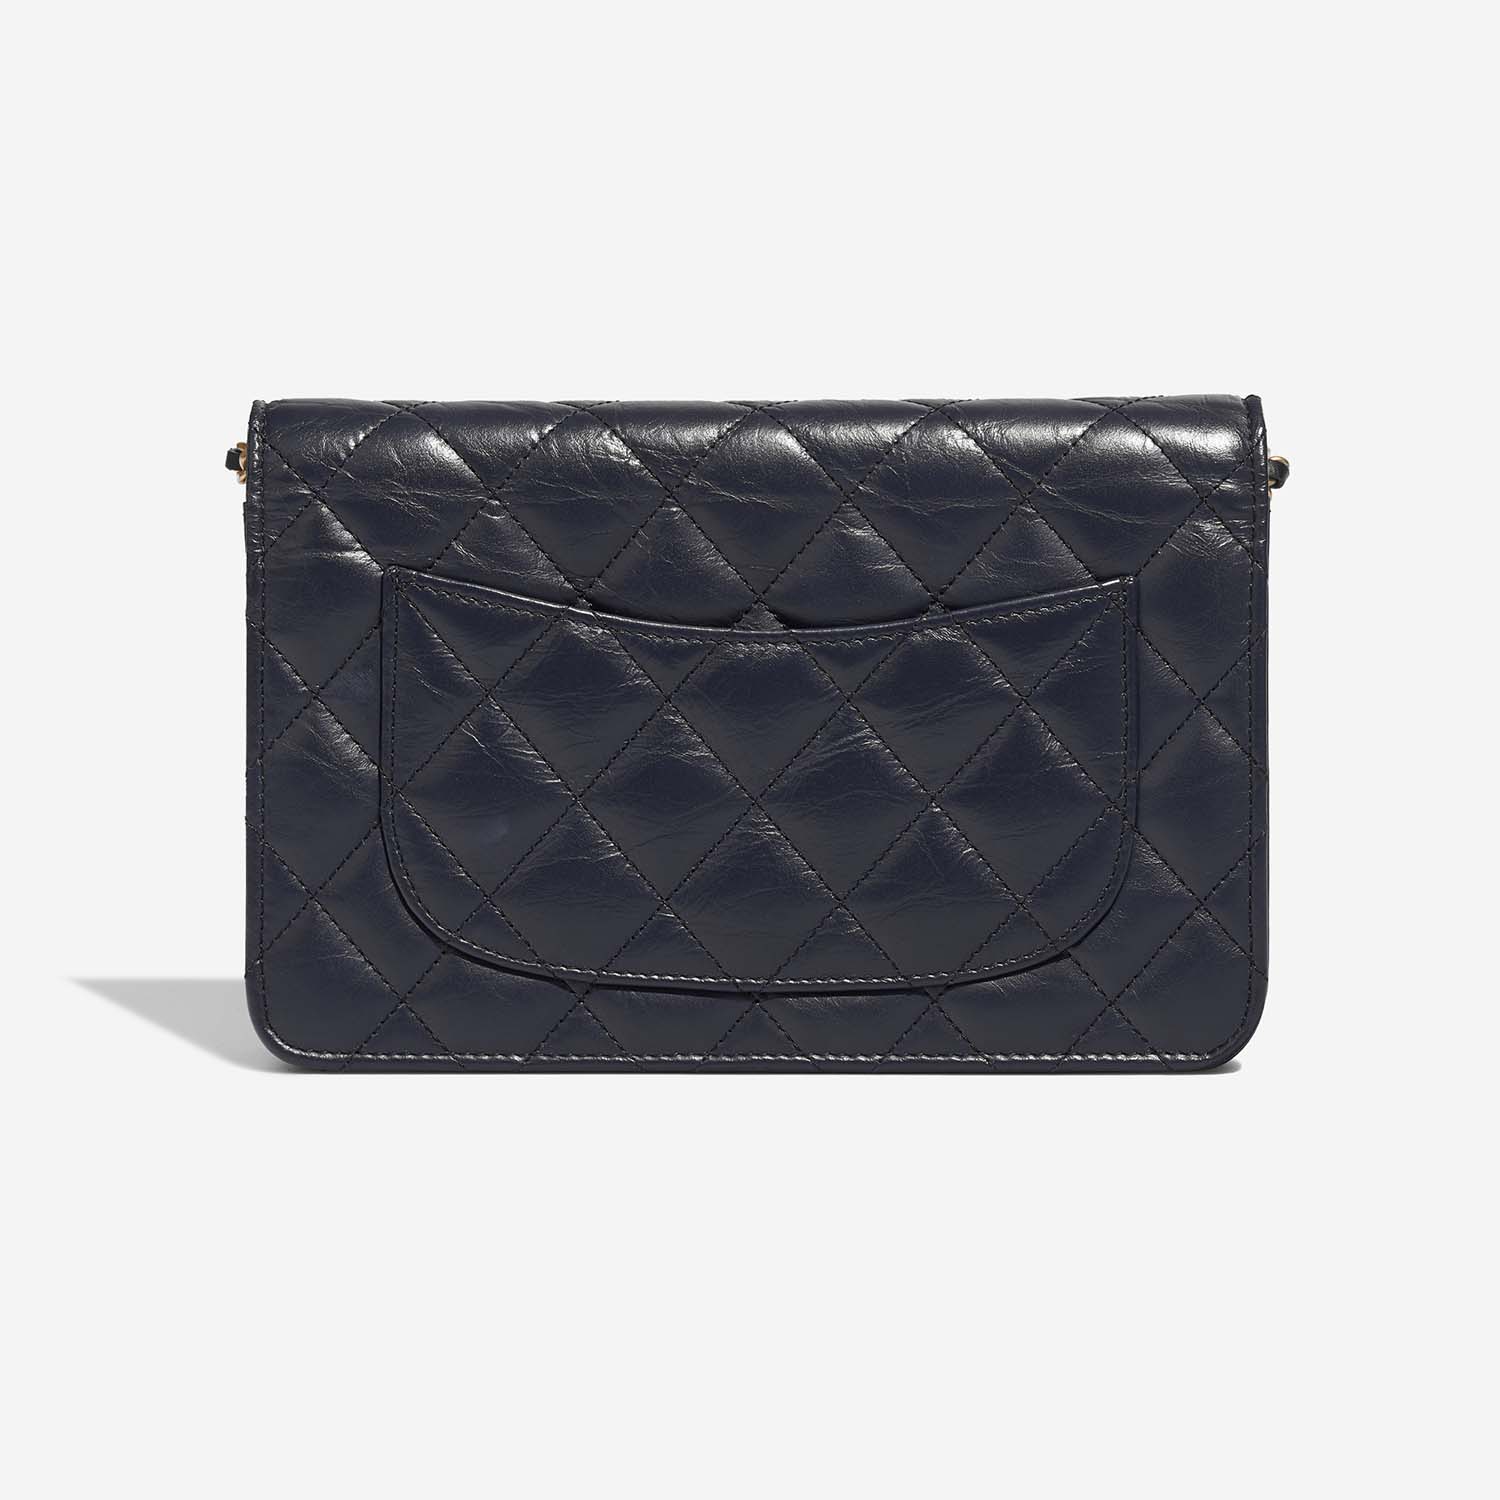 Pre-owned Chanel bag 2.55 Reissue Wallet On Chain Aged Calf Dark Blue Blue | Sell your designer bag on Saclab.com